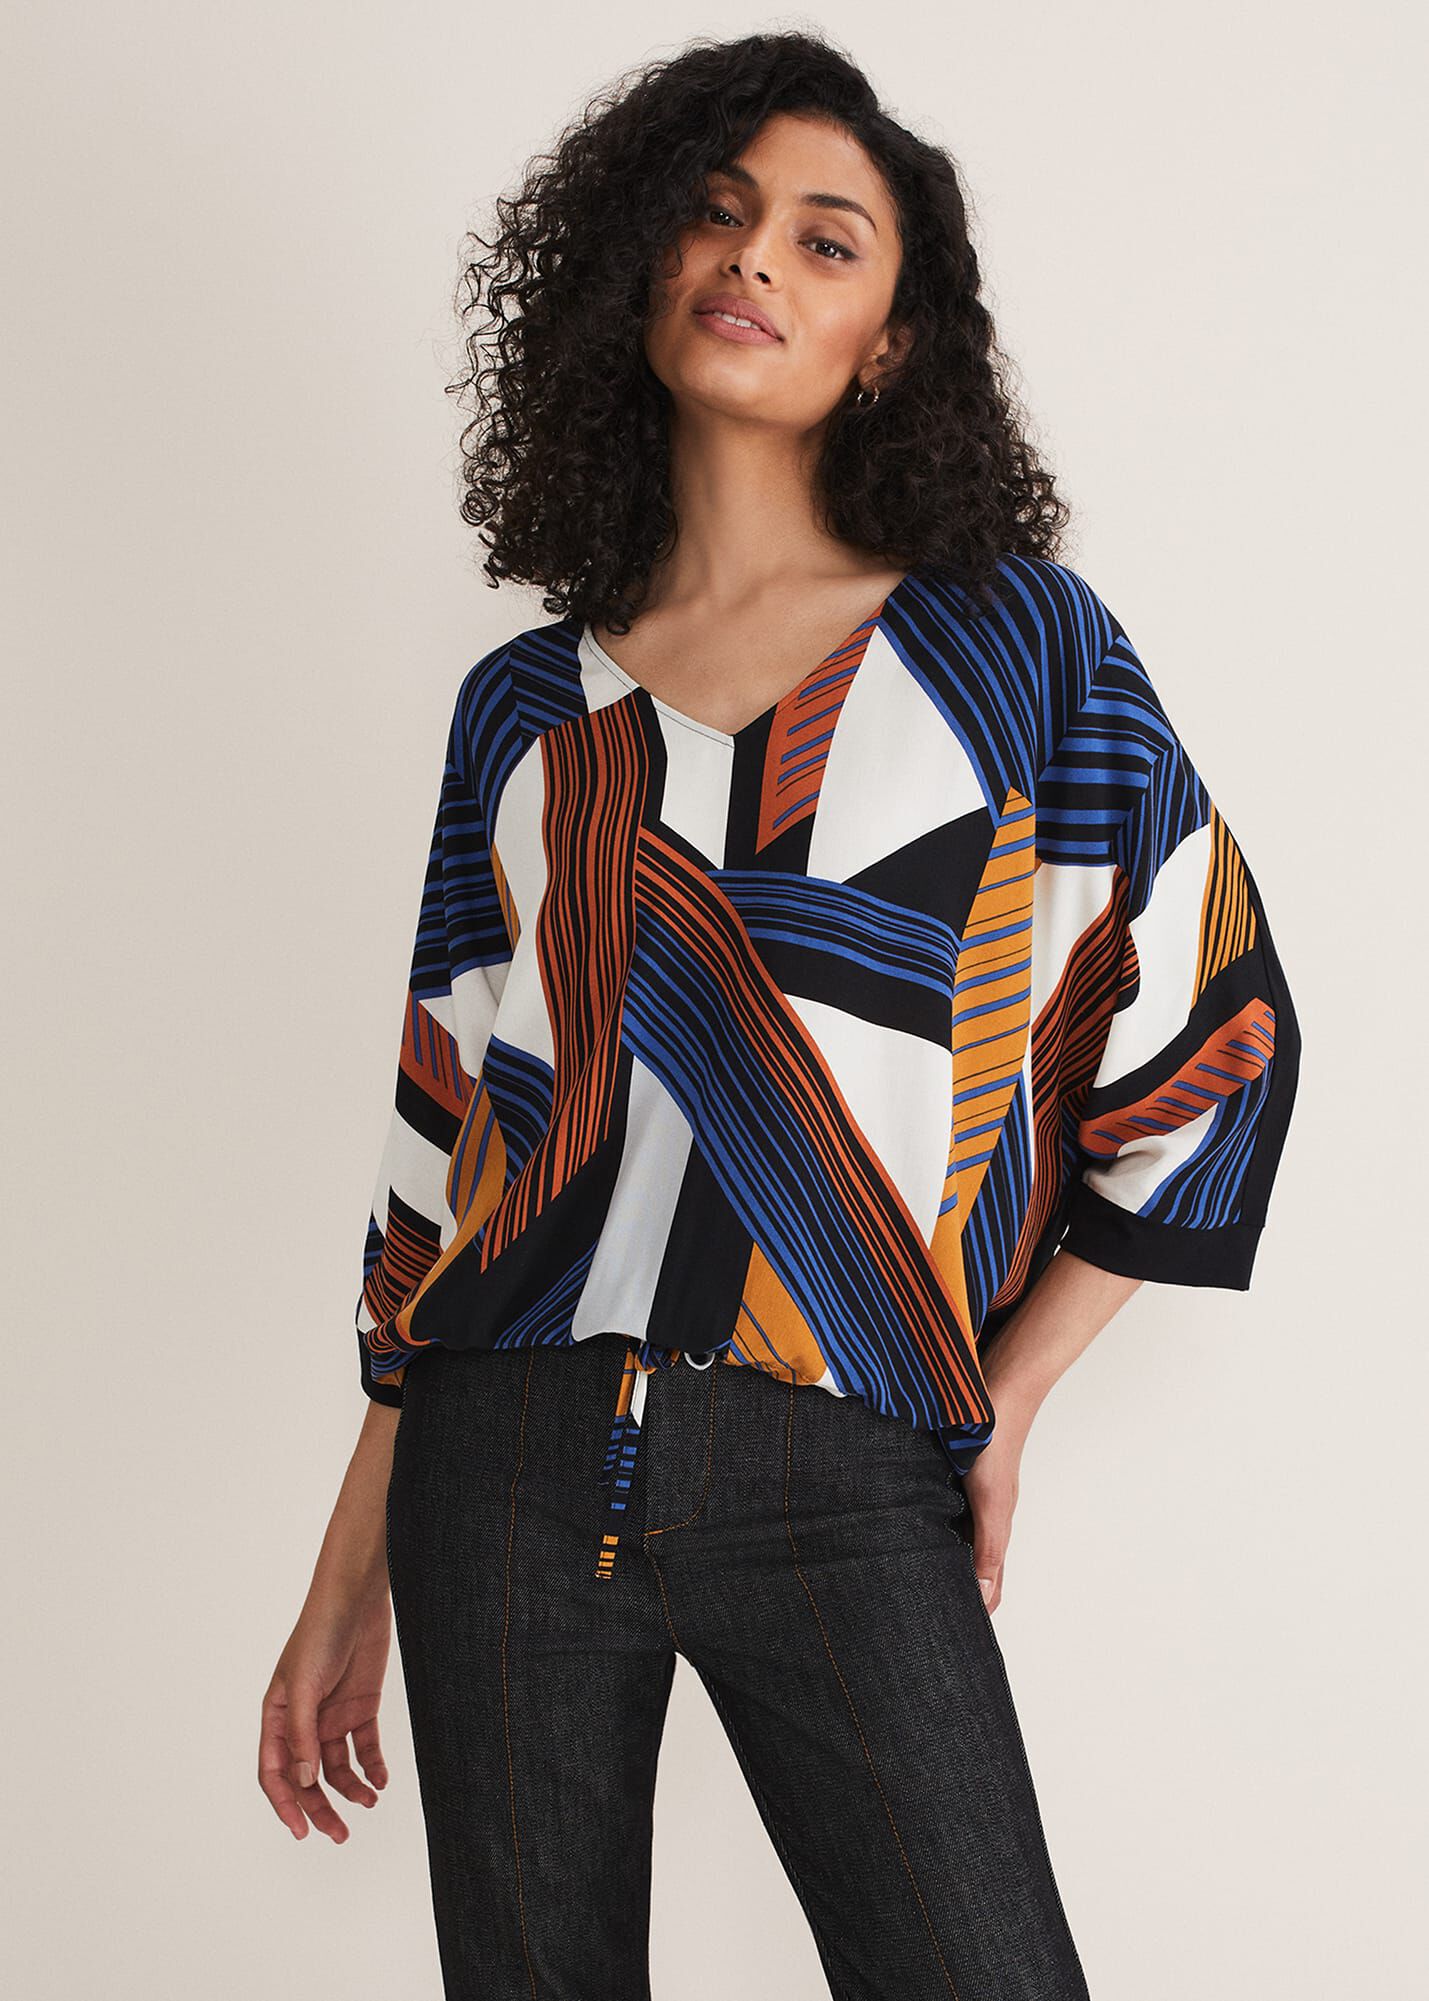 Women's Tops & Blouses | Going Out Tops | Phase Eight |